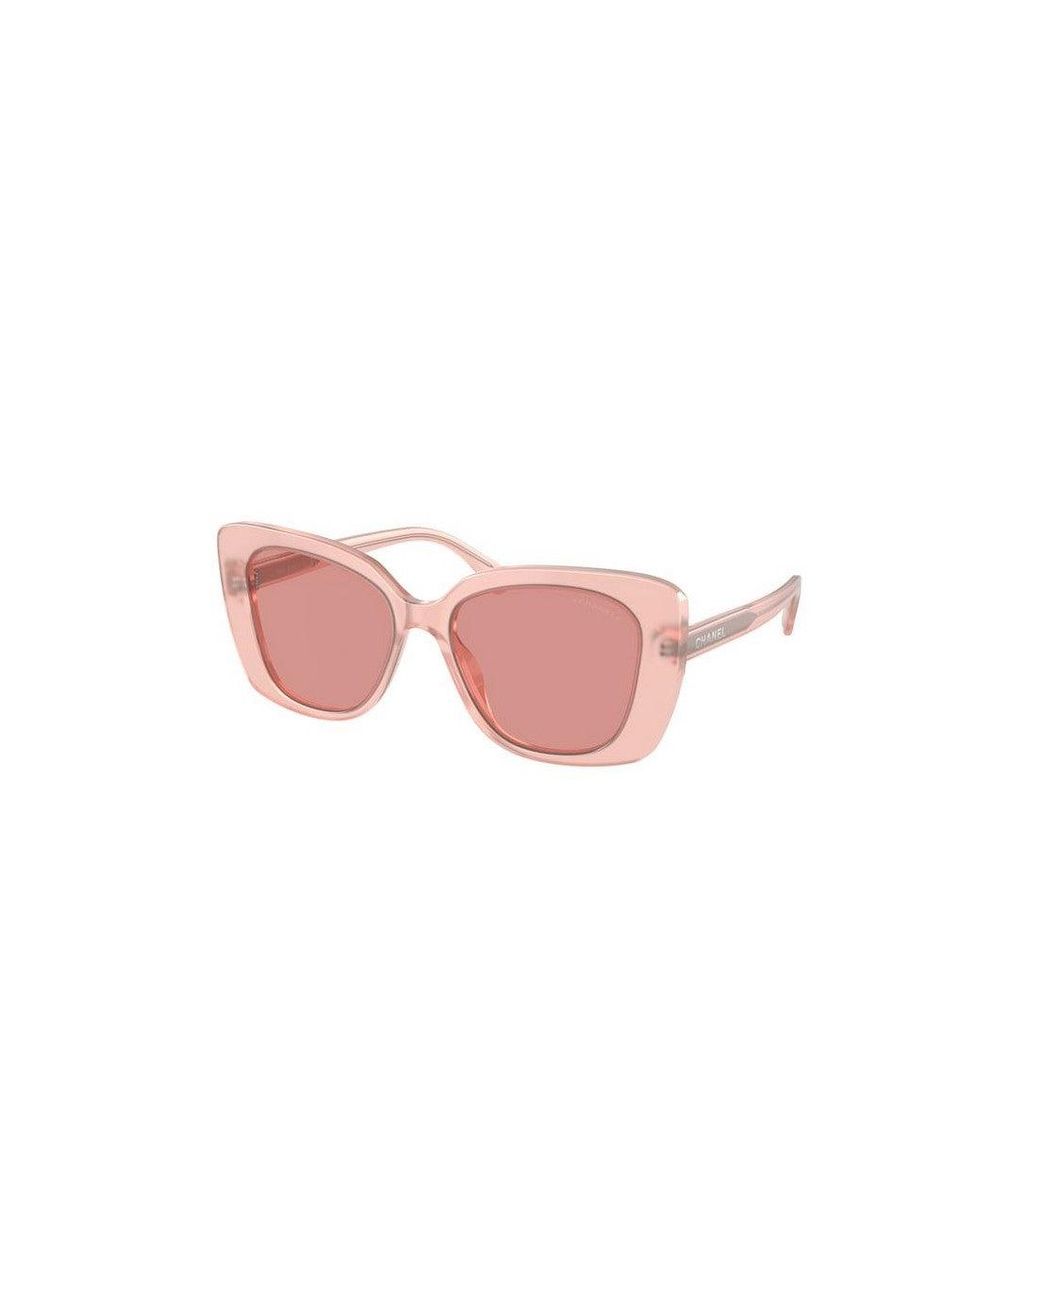 chanel glasses with clip on sunglasses women